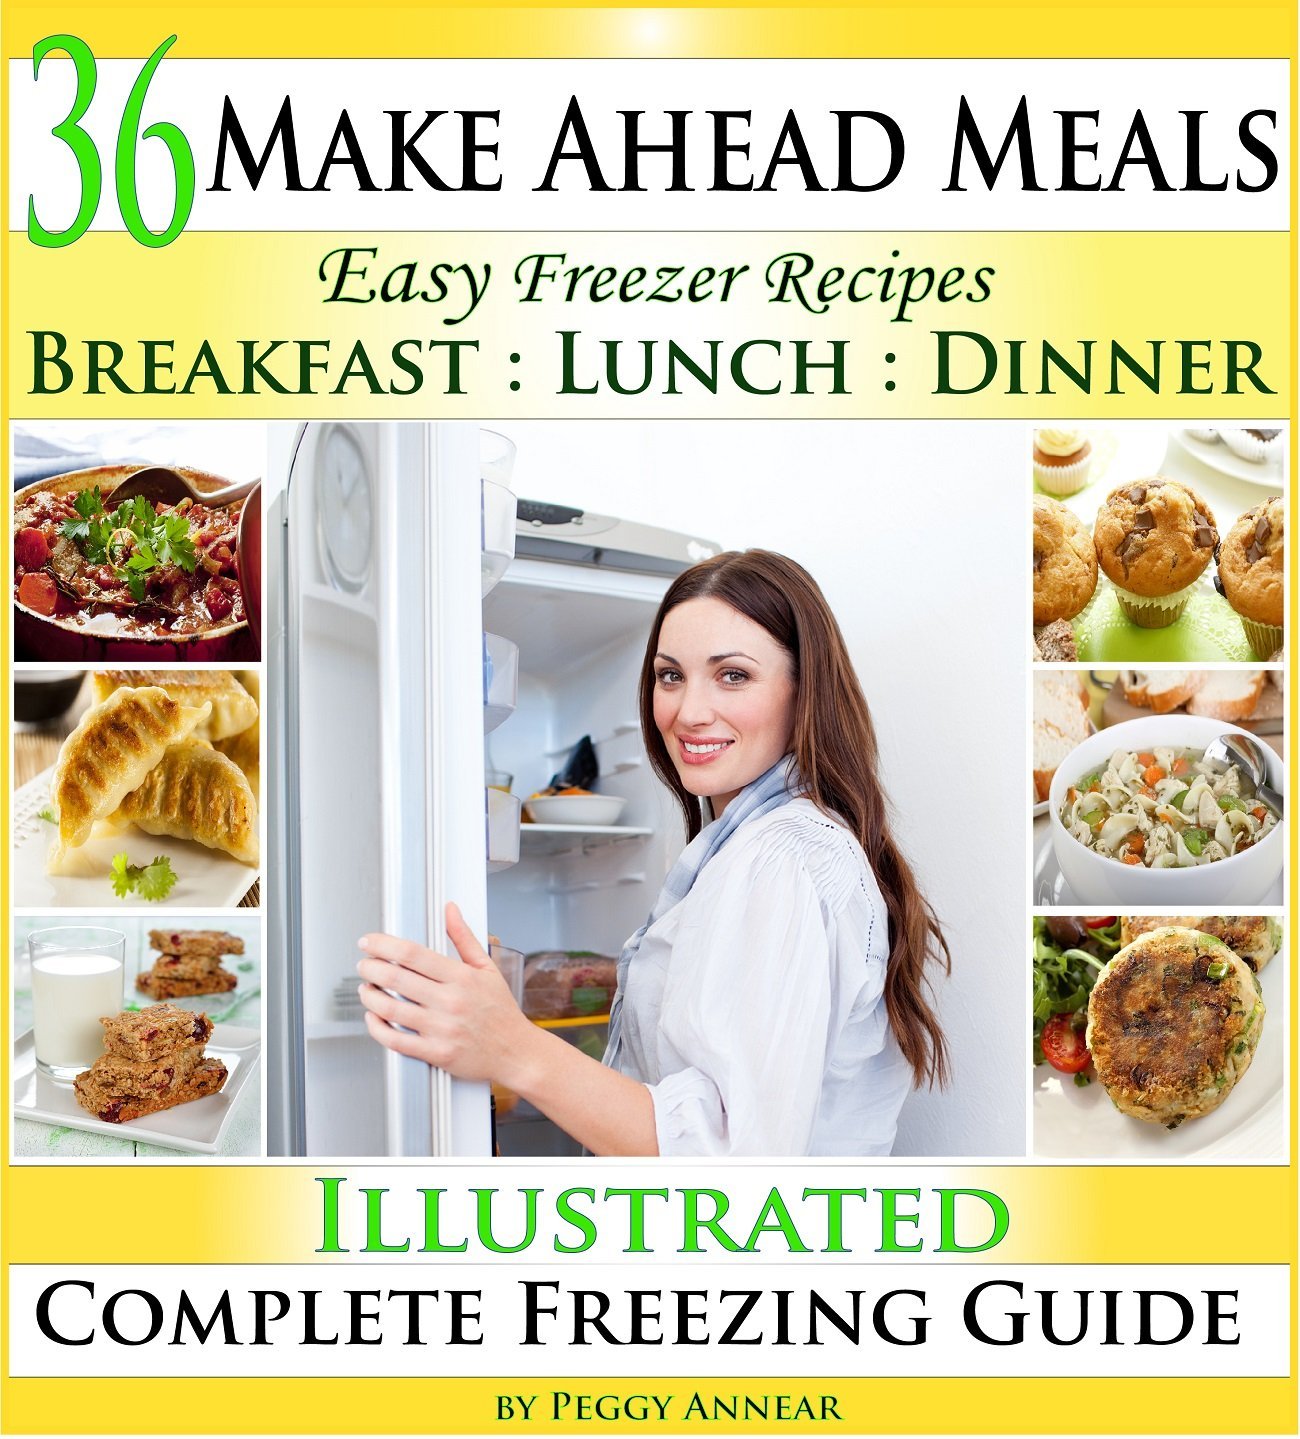 Easy Freezer Recipes to Make Ahead for Cooking Breakfast, Lunch and Dinner Including Crockpot Freezer Meals by Peggy Annear